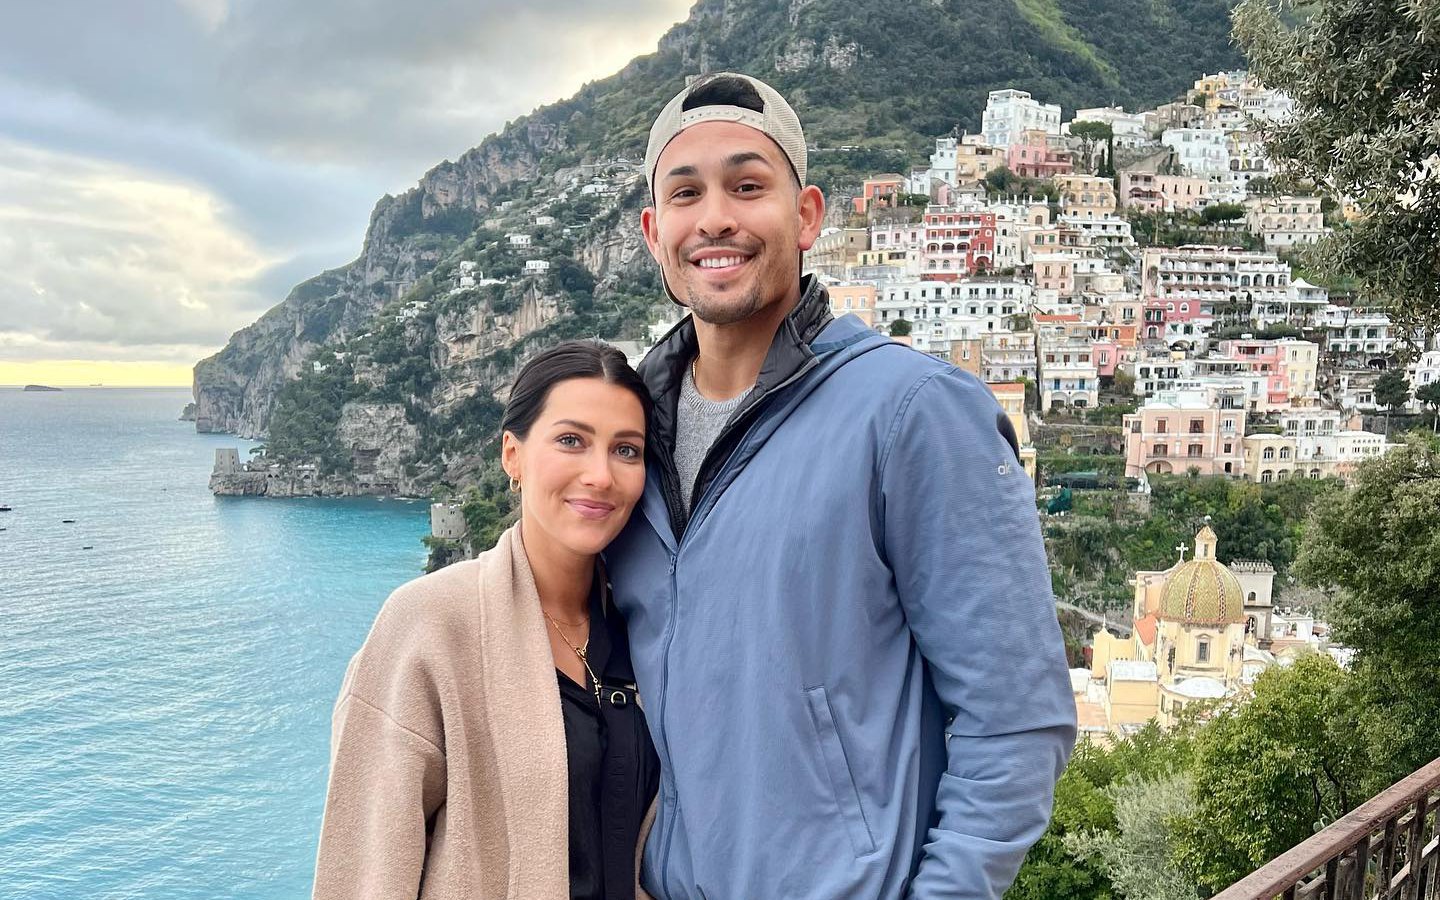 Bachelor Nation's Thomas Jacobs Hints 'Yesterday Might Have Been a Good Day' to Marry Becca Kufrin